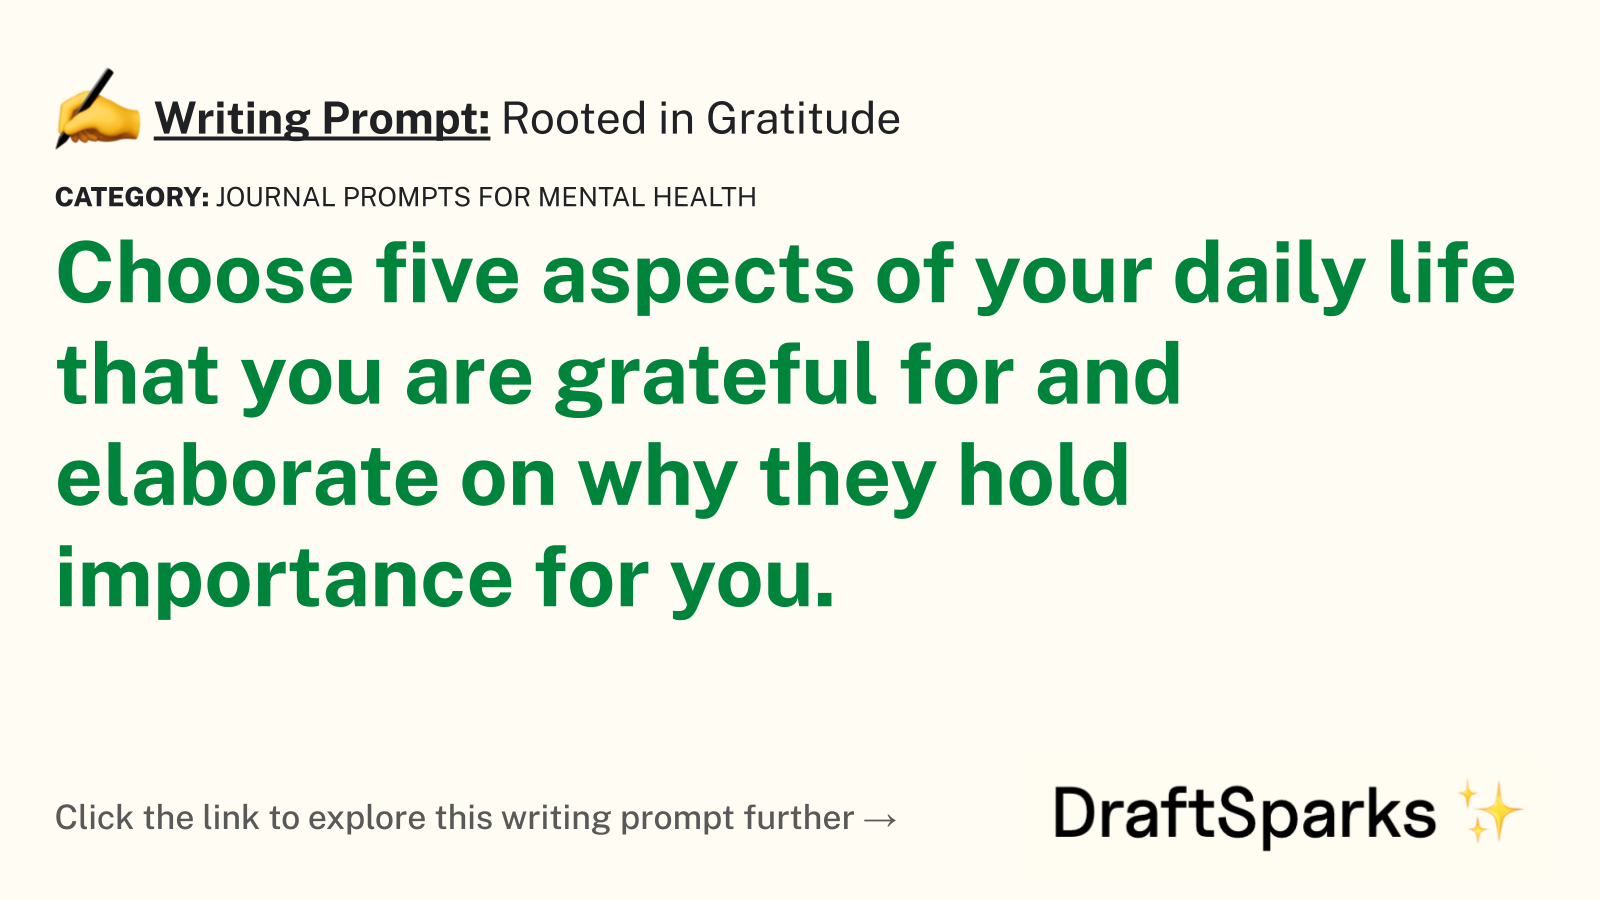 Rooted in Gratitude